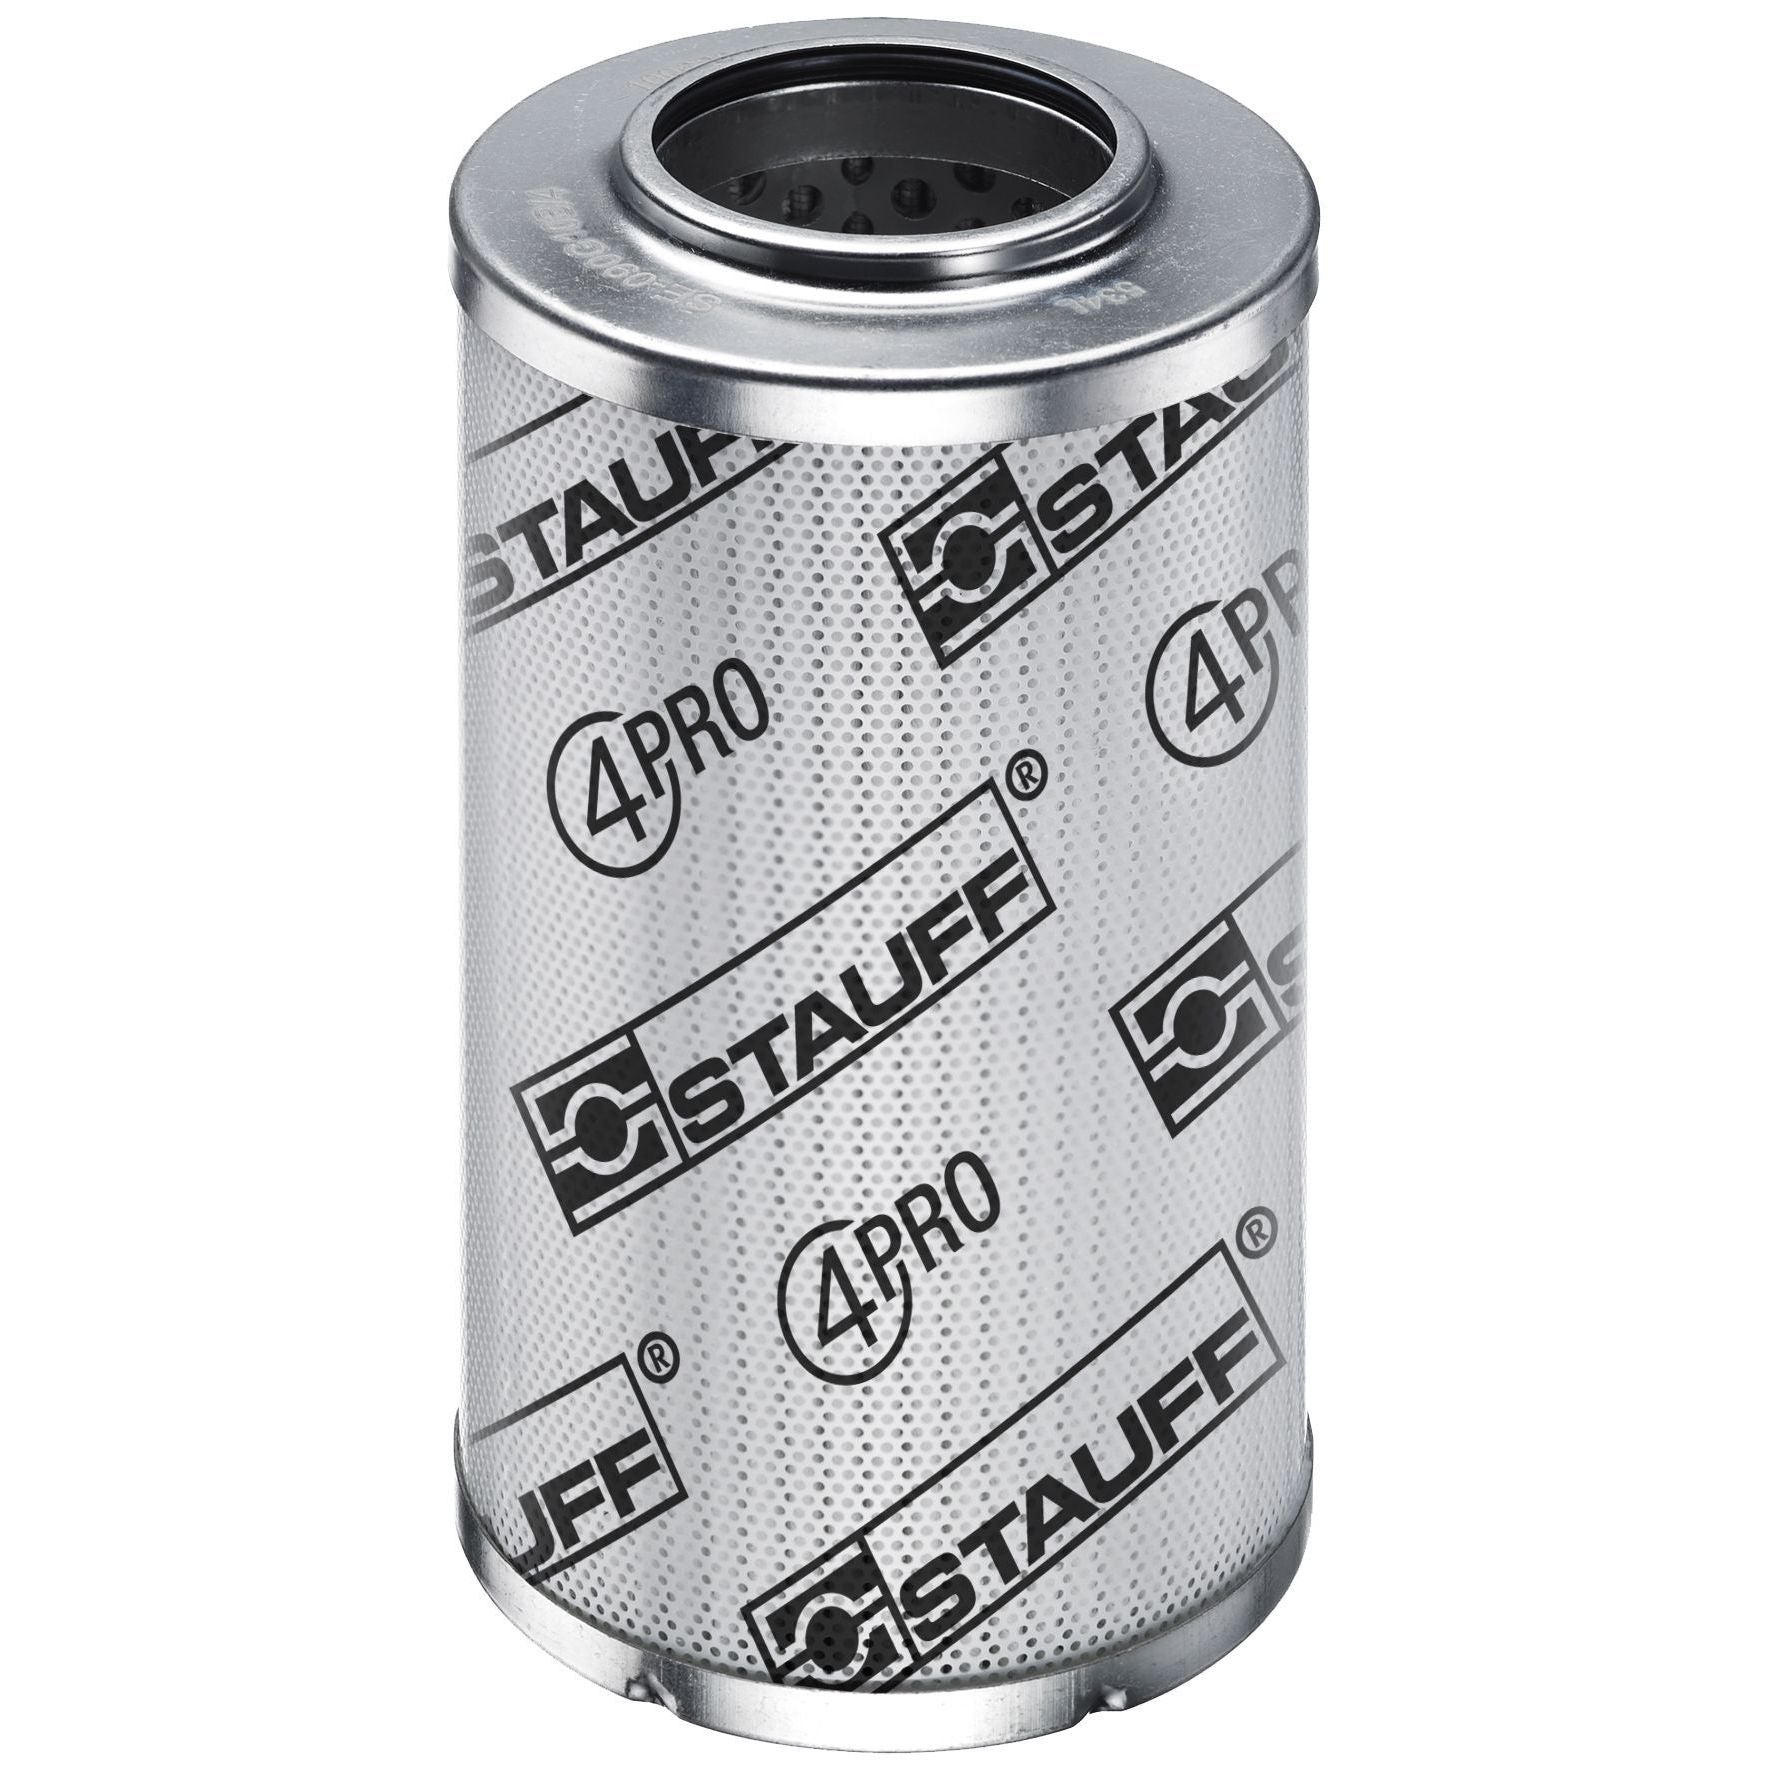 SE-090-H-20-V/4 : Stauff SF-090 Series Filter Element, 20 Micron, Synthetic, 3045psi Collapse Differential, Viton Seals